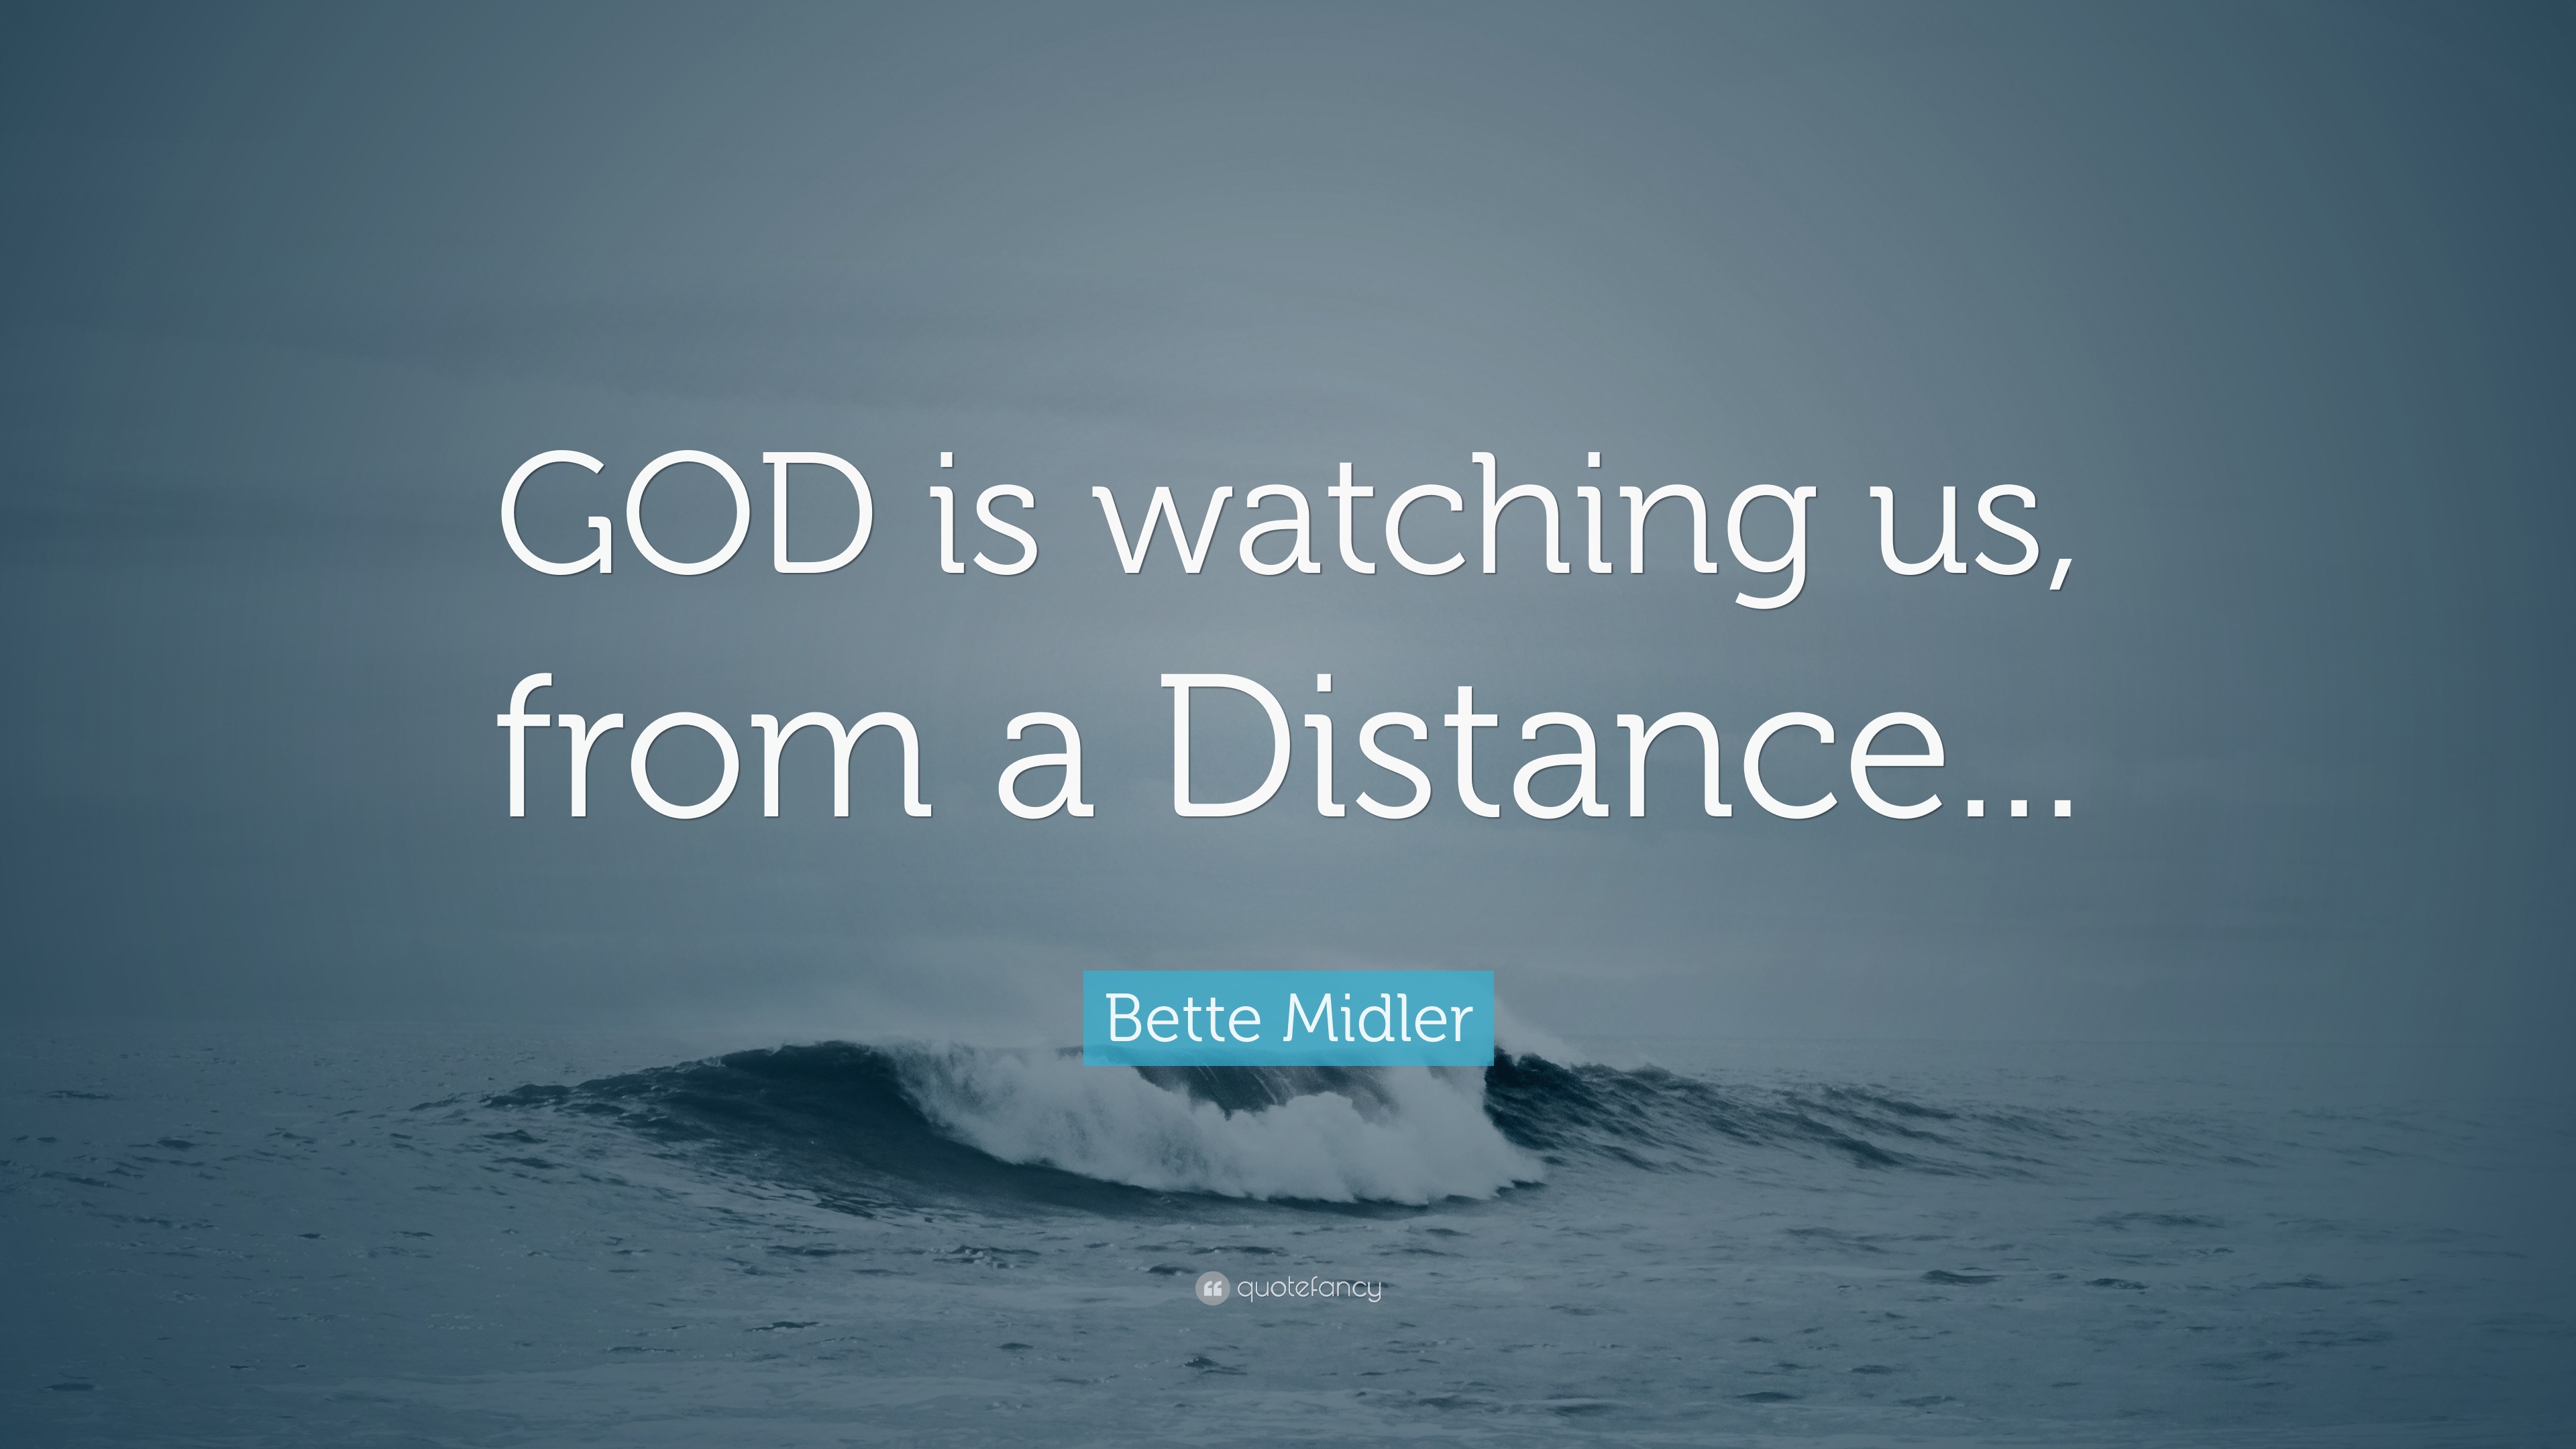 Bette Midler Quote: 